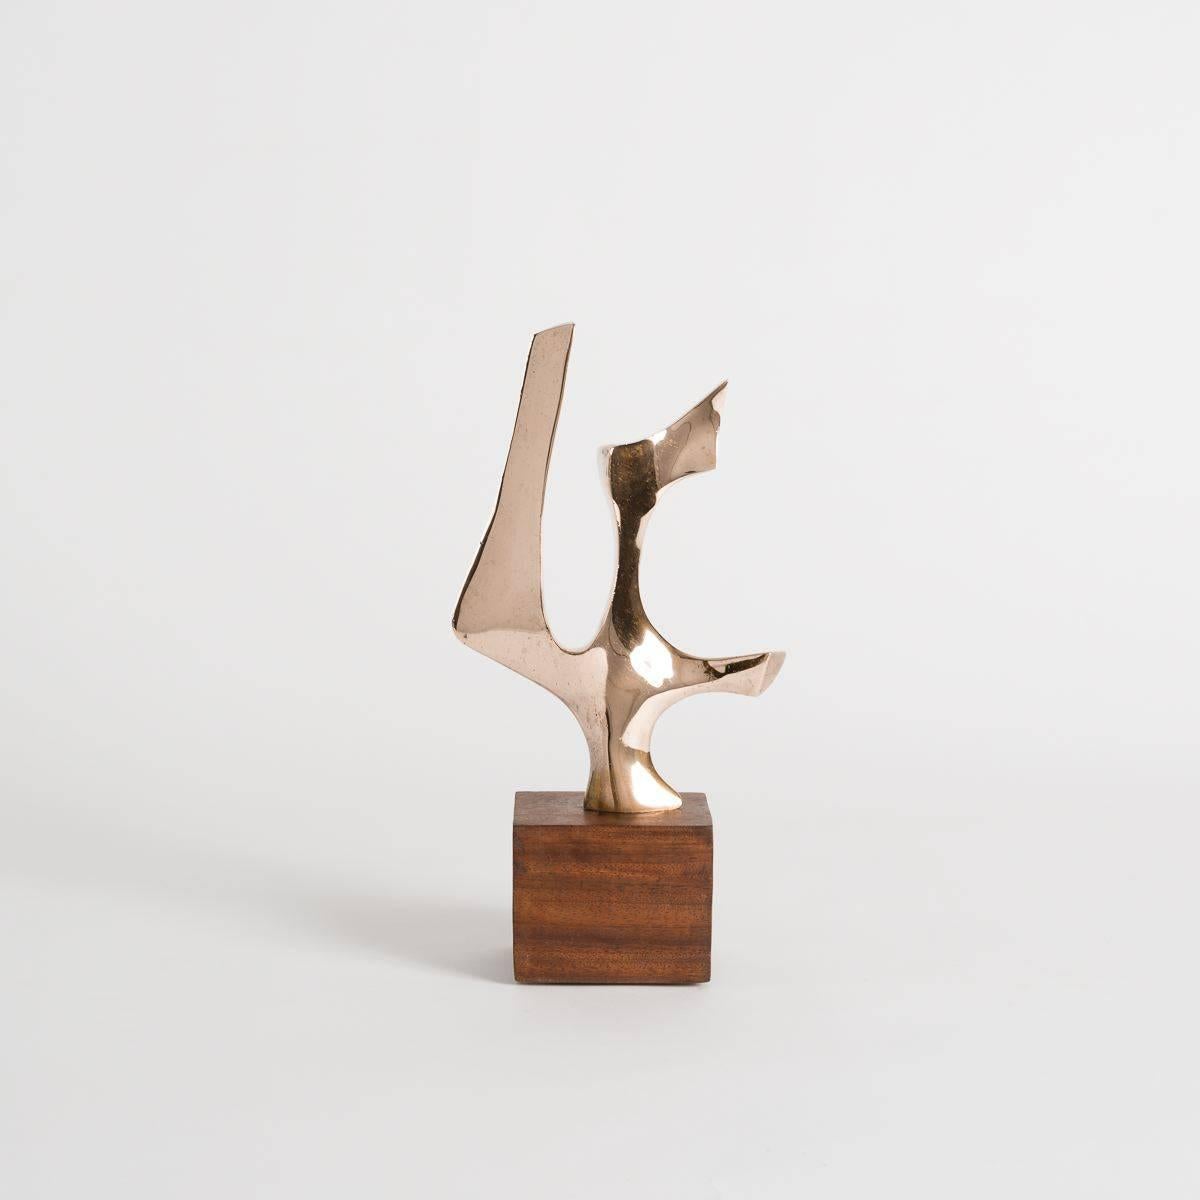 A piece in bronze, elevated on a square wooden pedestal, by Fred Brouard, illustrious and groundbreaking French sculpture and furniture maker of the mid to late 20th century.

Numbered: 3/8
Inscribed: F BROUARD.